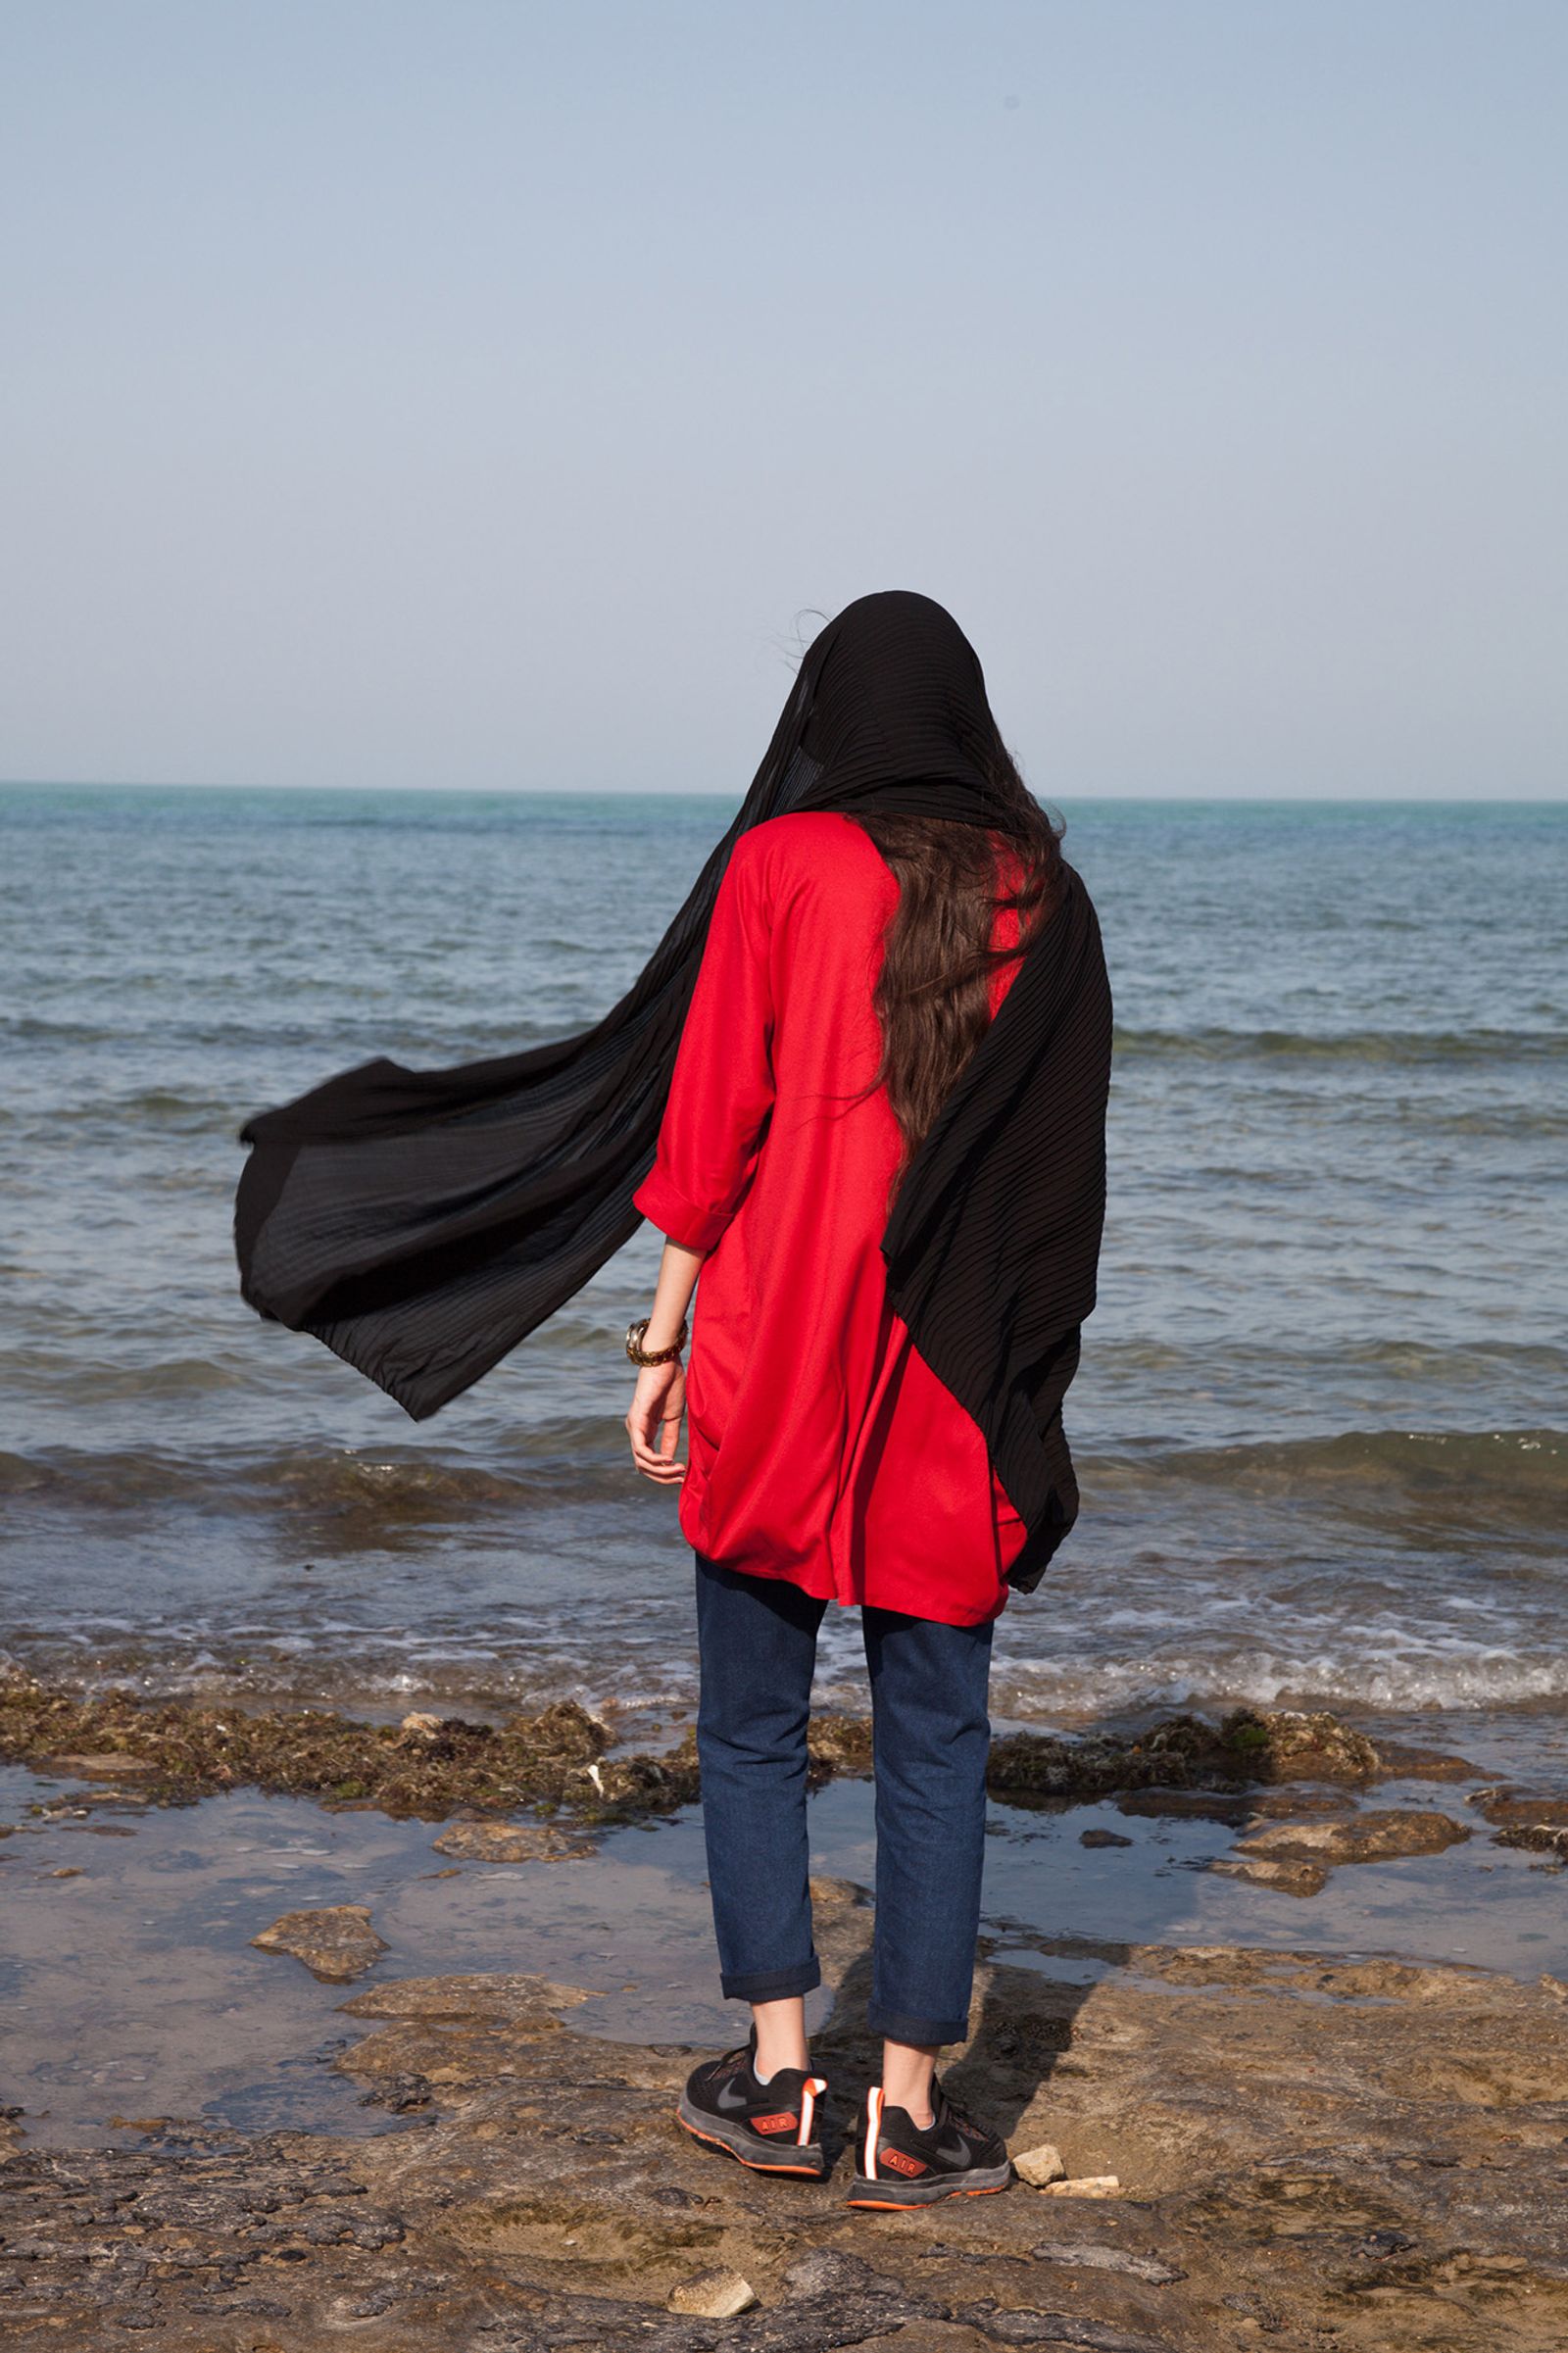 © Atefe Moeini - Image from the ما (we) photography project